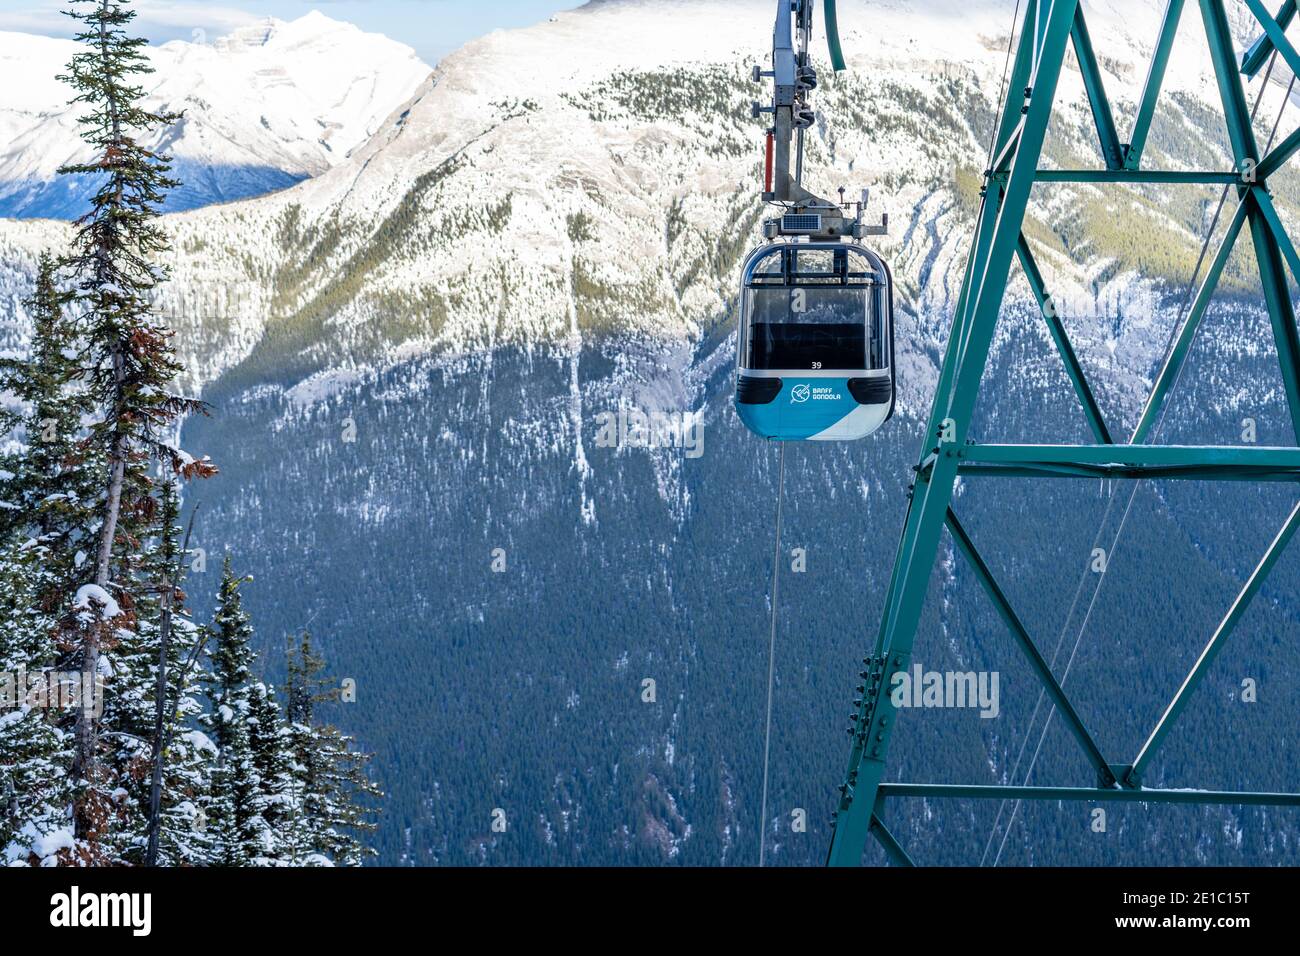 Banff Gondola in early winter time. Banff National Park, Canadian Rockies. Stock Photo